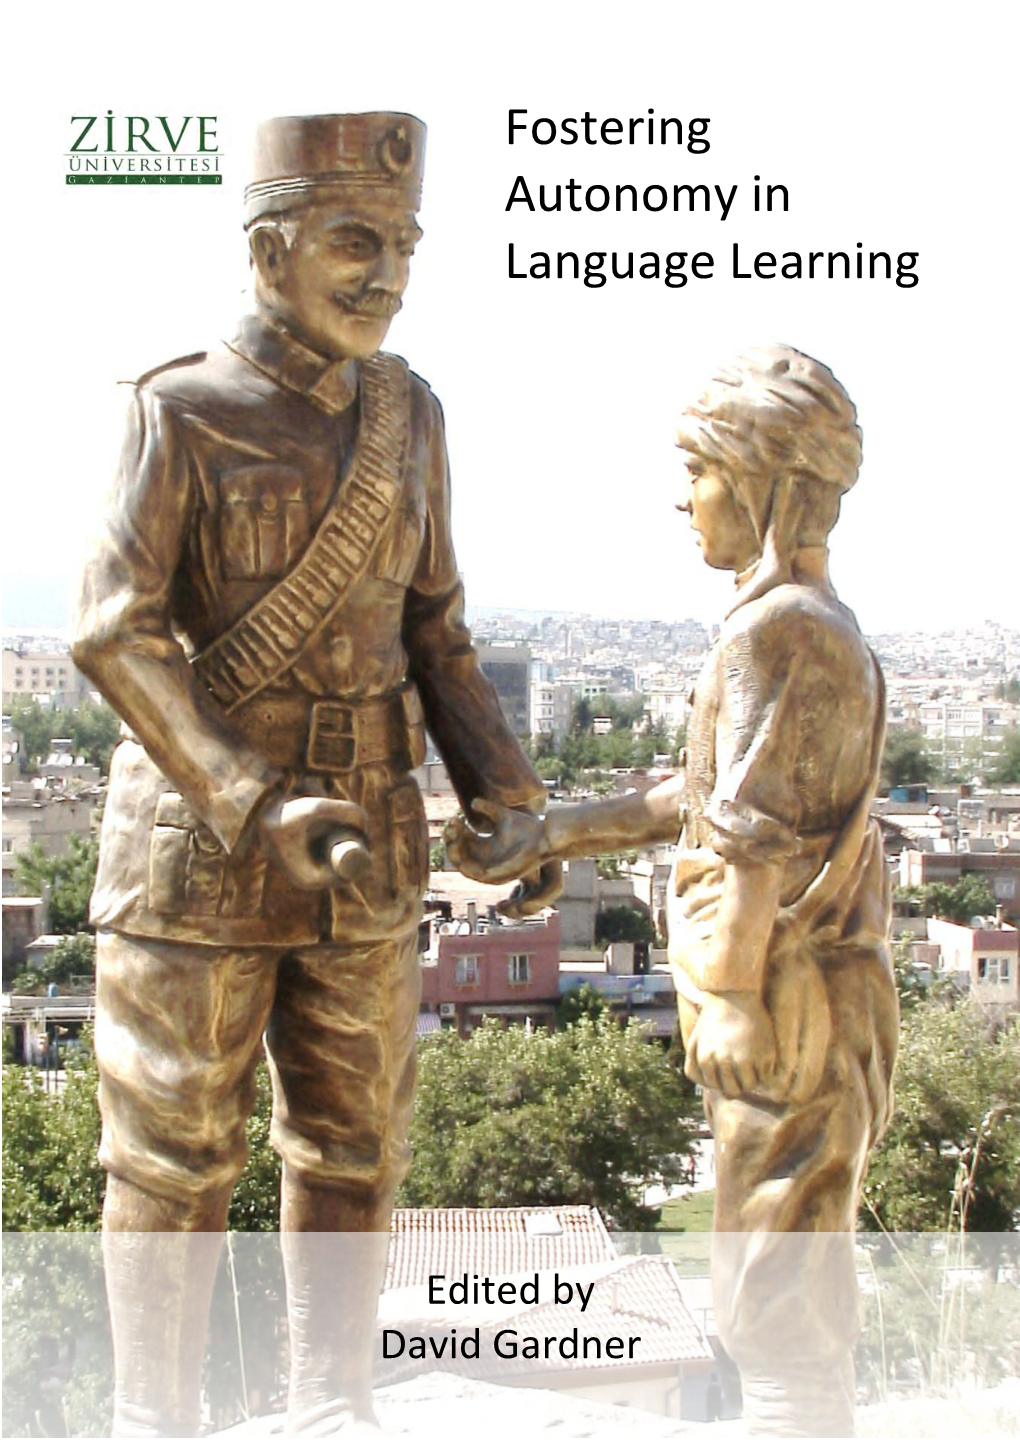 Fostering Autonomy in Language Learning